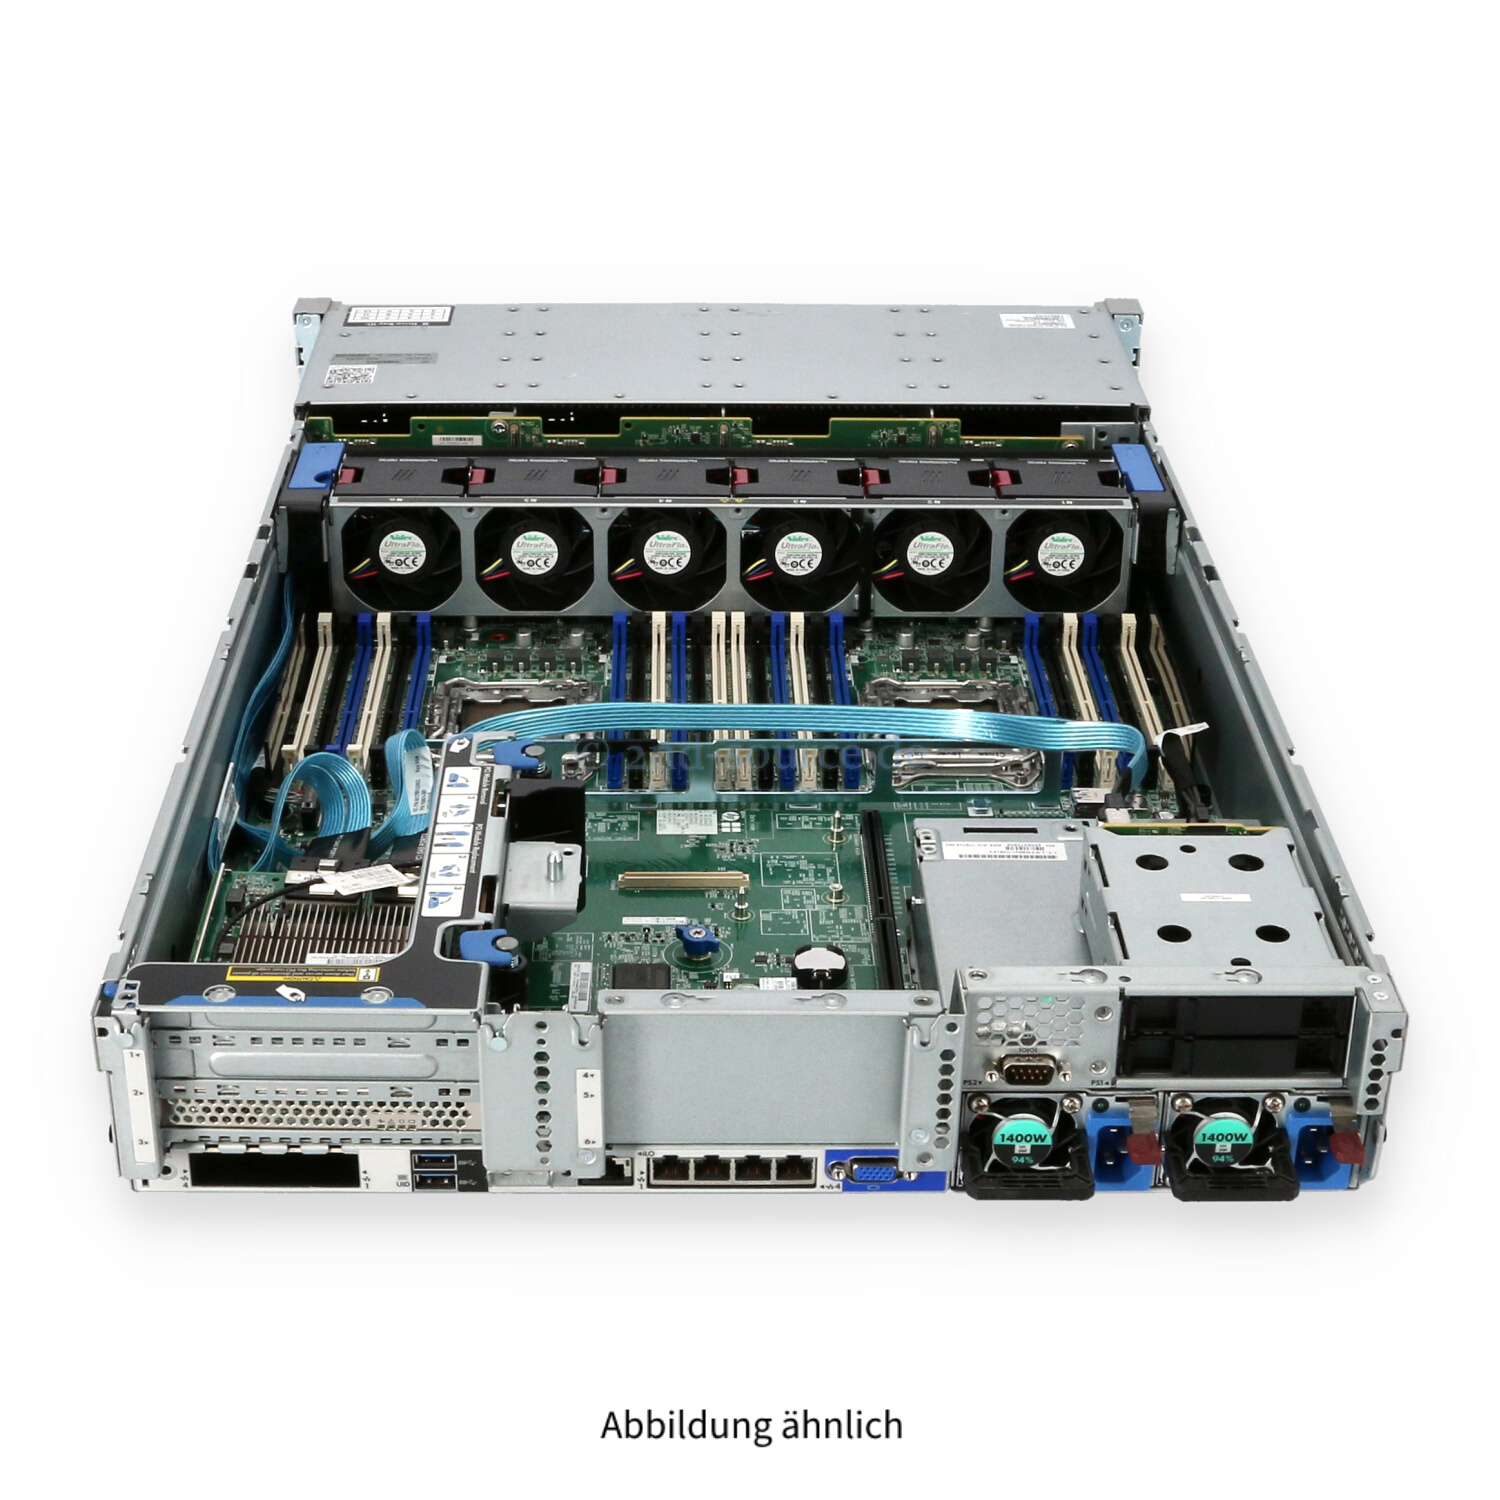 HPE DL380 G9 12xLFF 2xSFF P840/4GB 2x1400W CTO Chassis 719061-B21